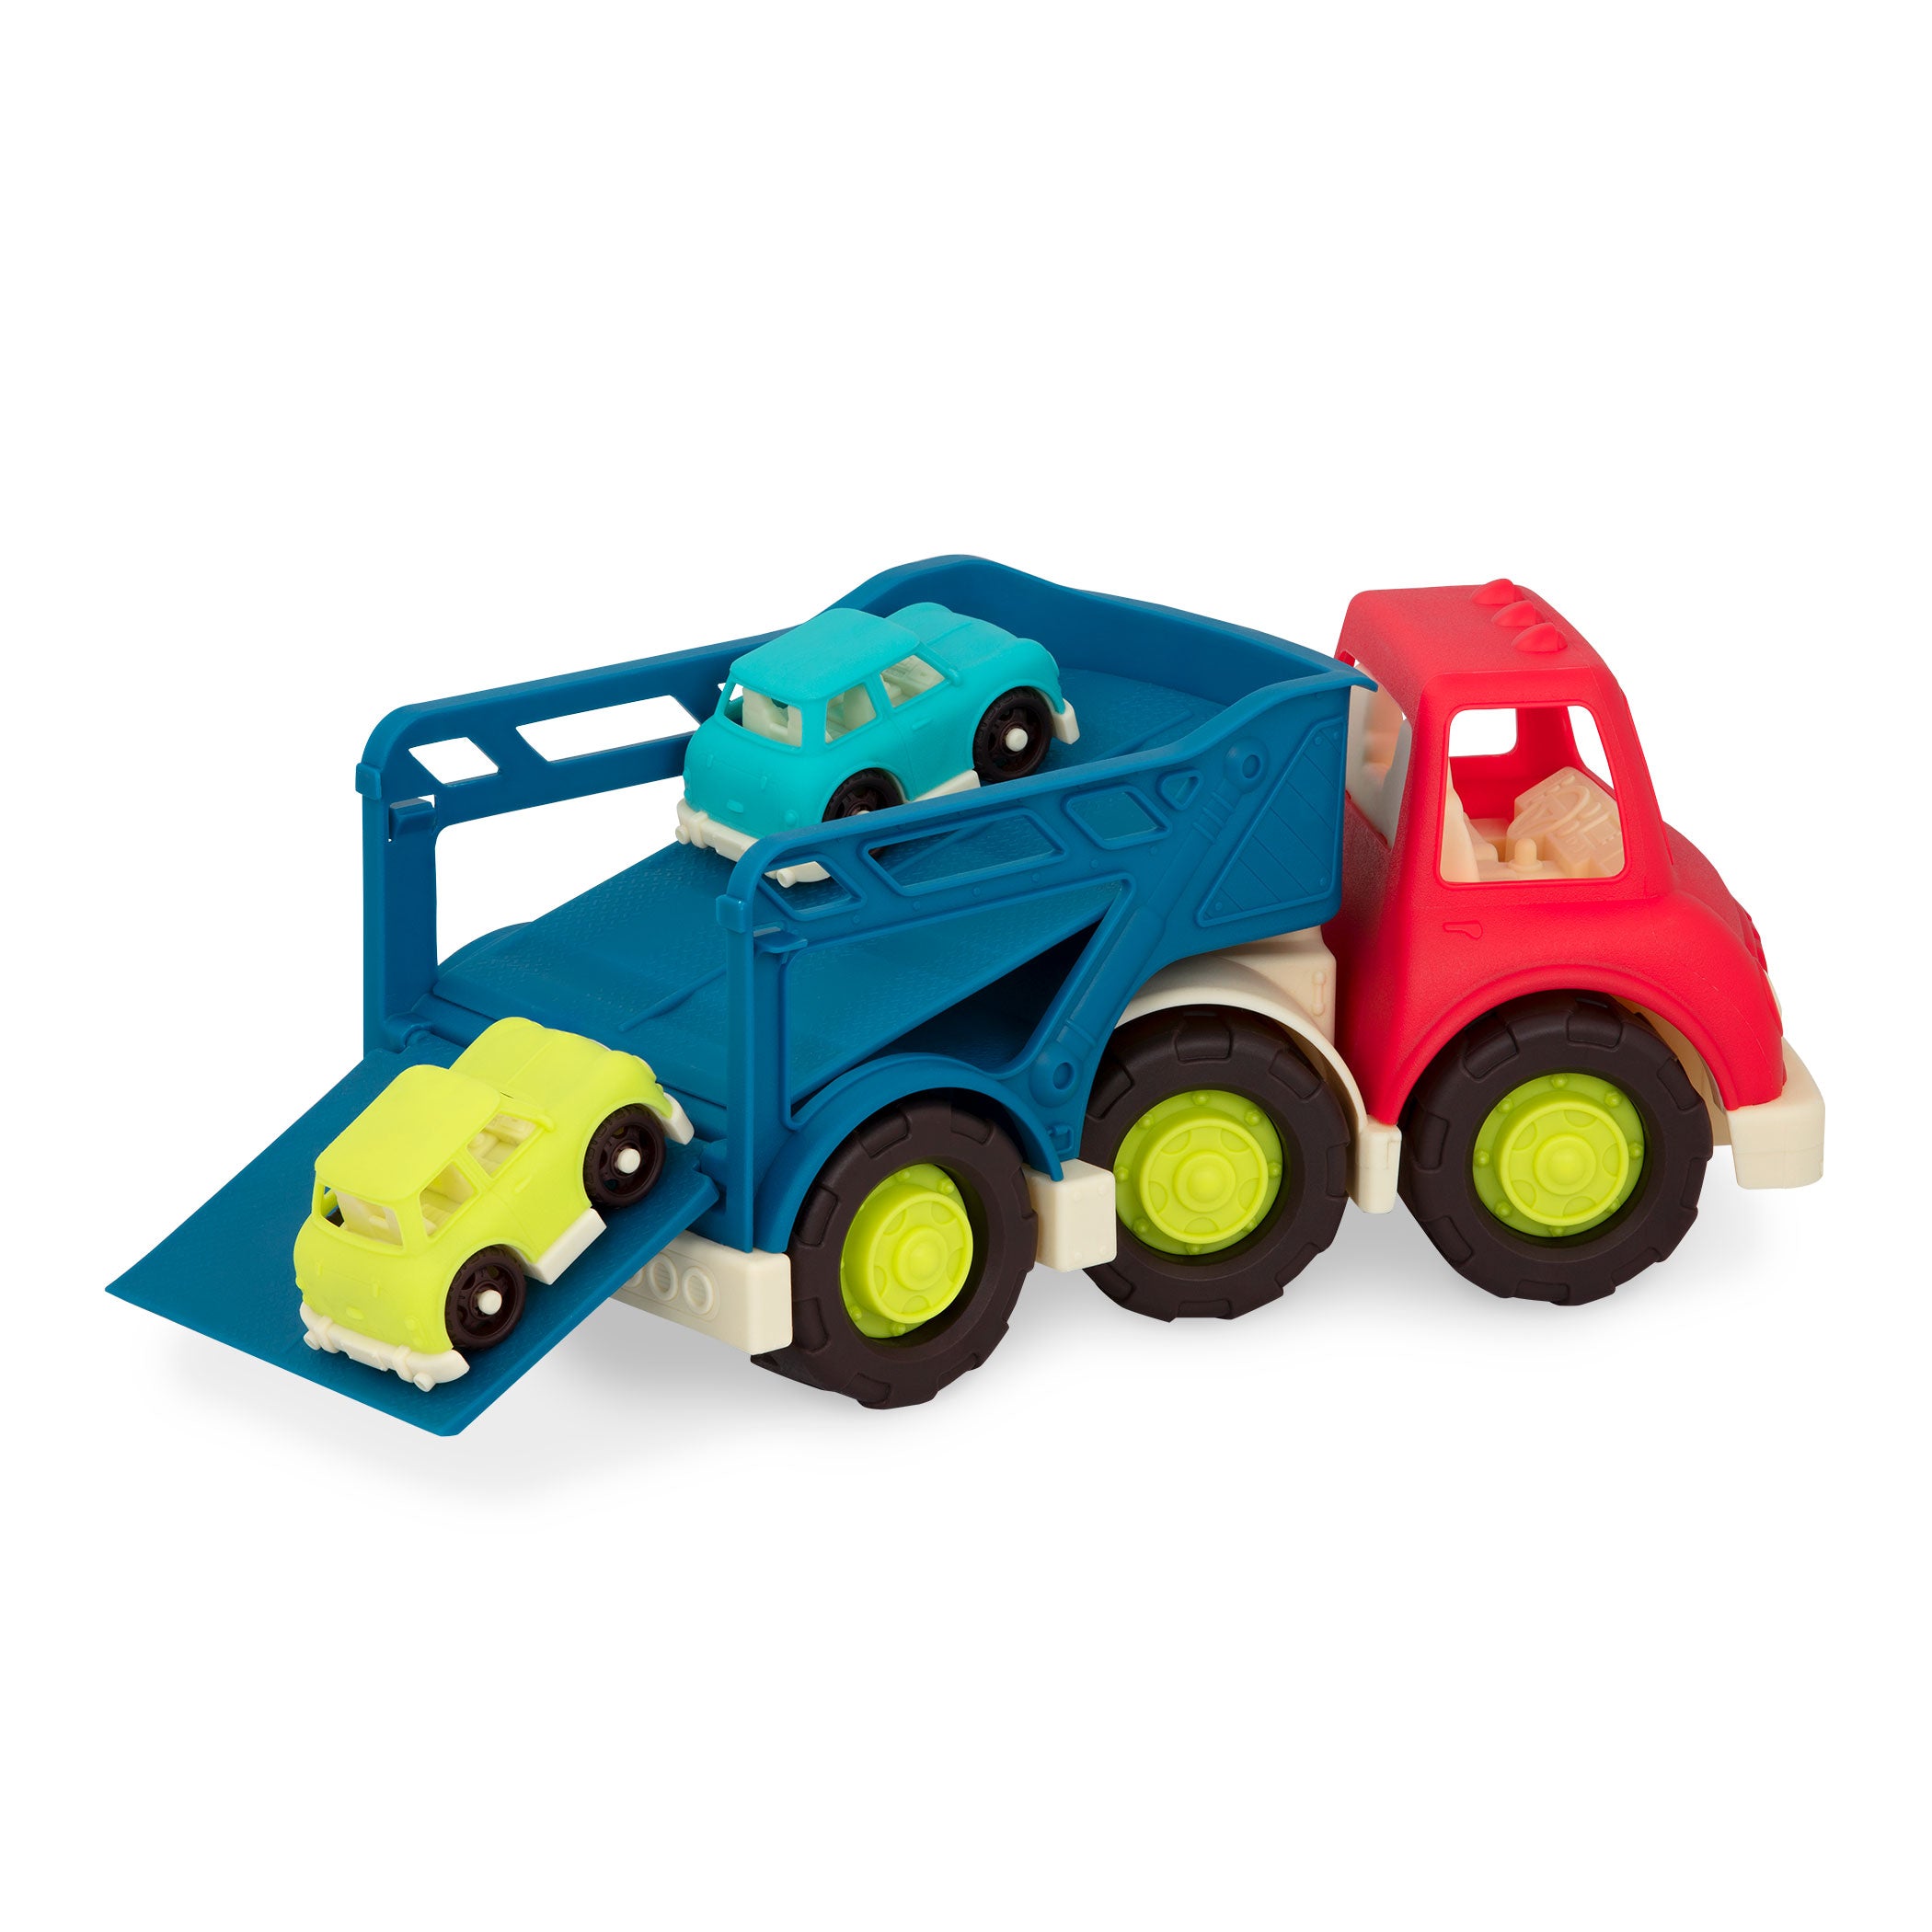 Toy car carrier with two cars.